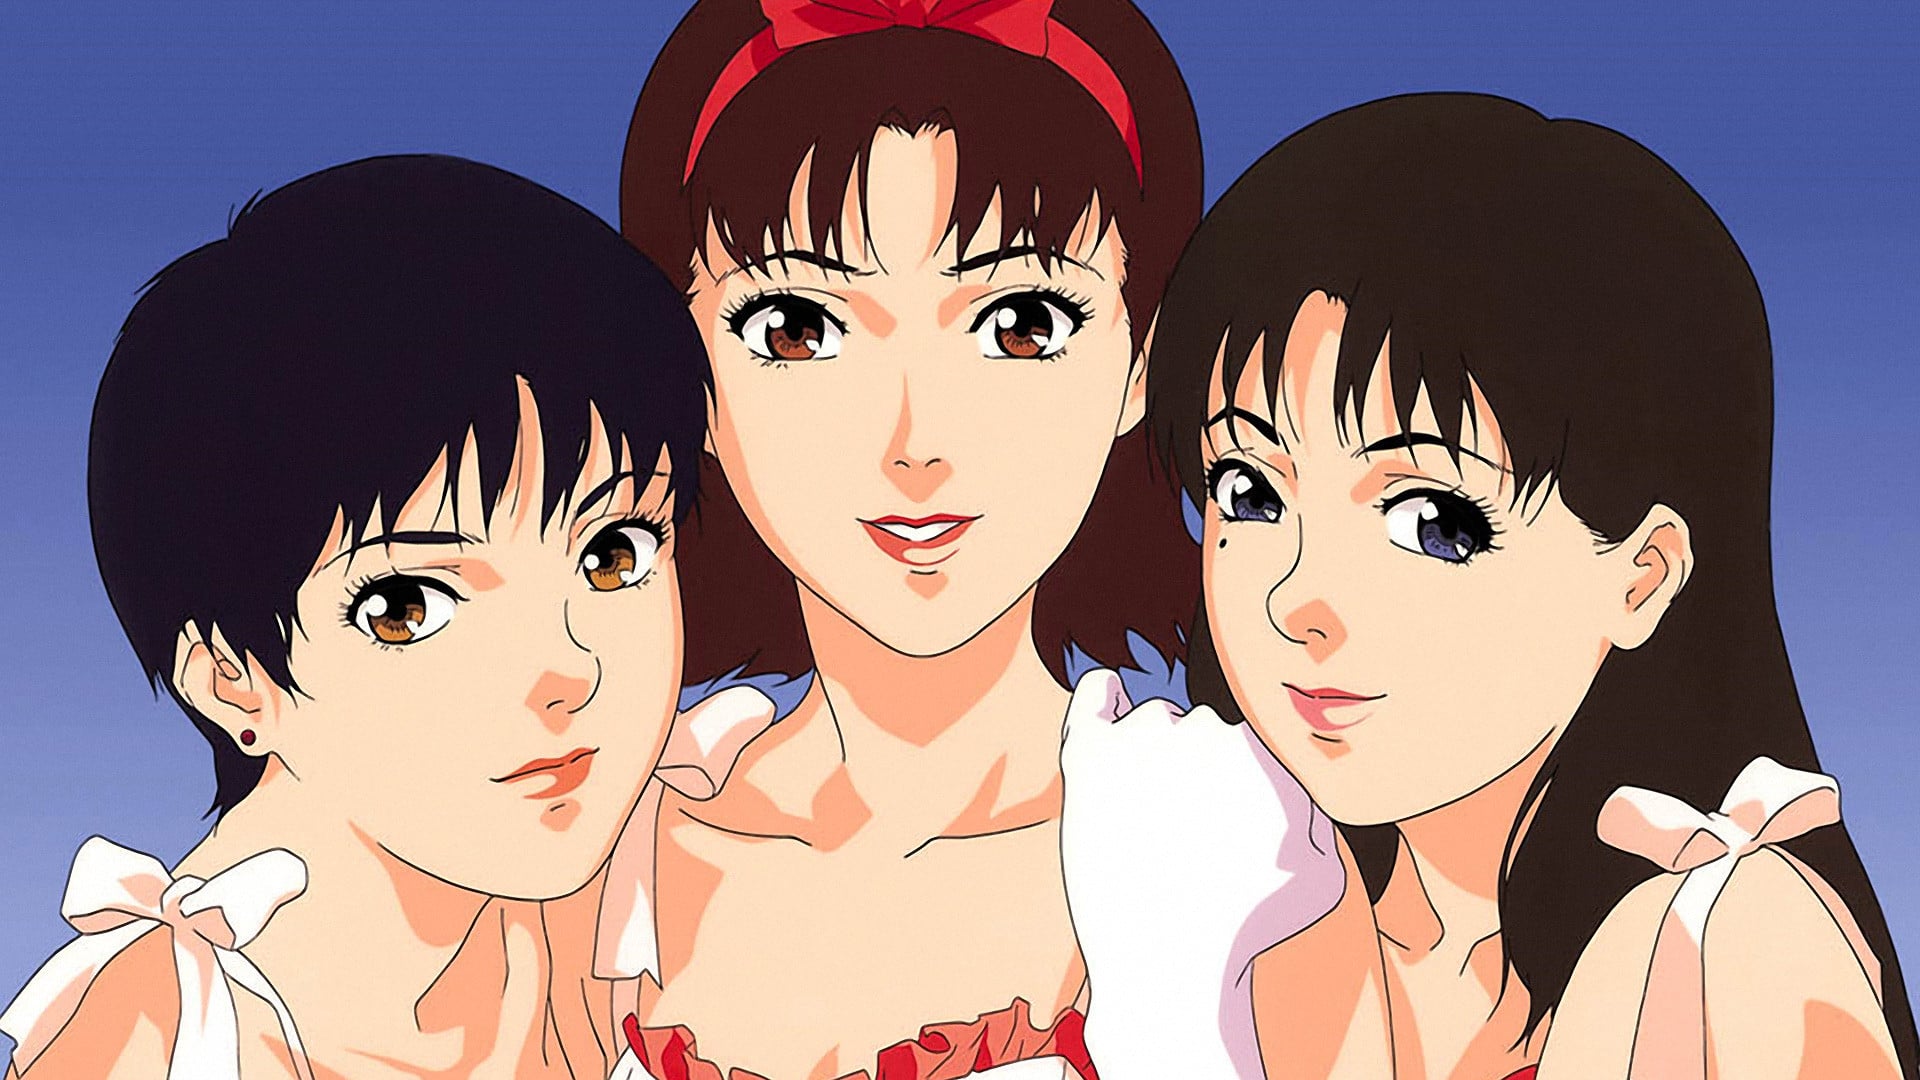 Anime Perfect Blue HD Wallpaper | Background Image